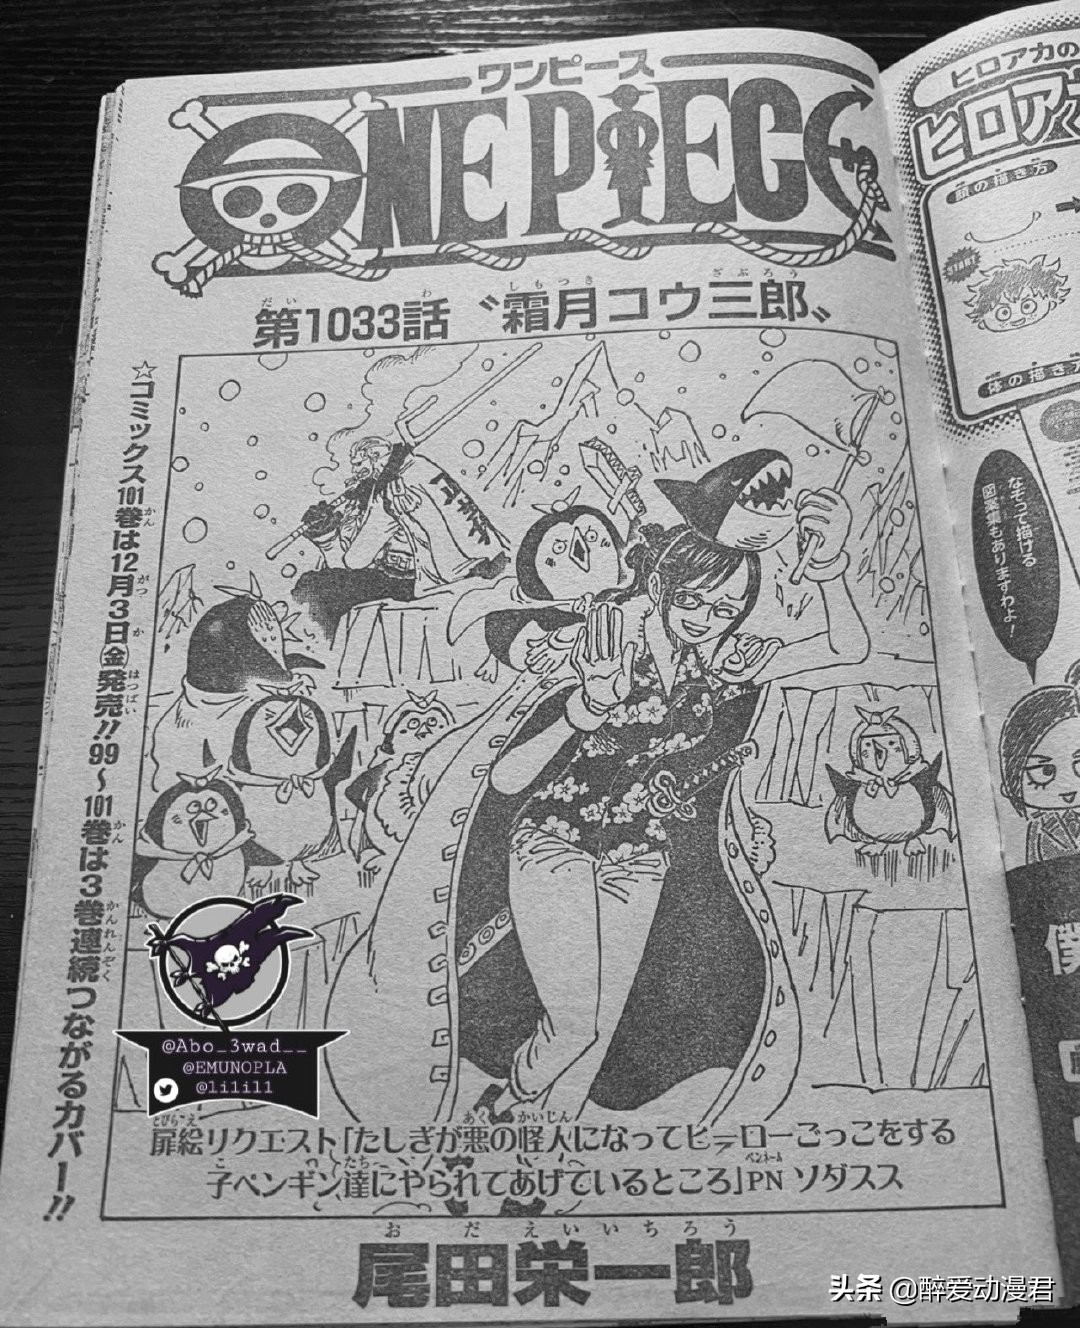 One Piece Chapter 1033 Full Picture In Order To Defeat The Flames Sauron Officially Awakens The Overlord S Domineering Inews